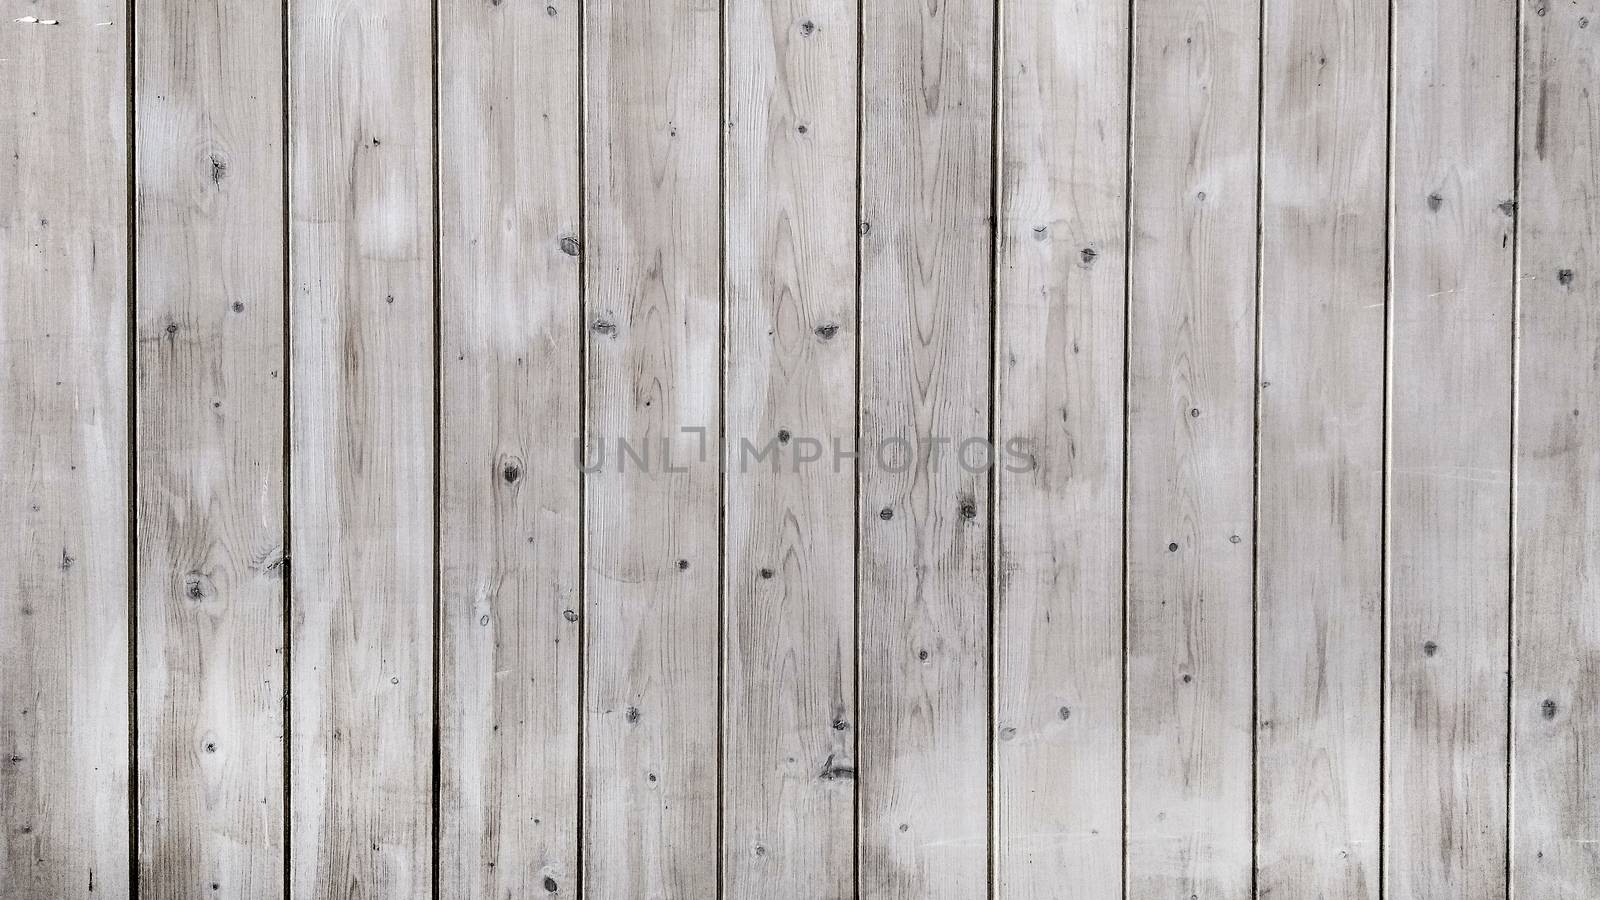 Shabby chic style wooden background composed by planks by robbyfontanesi